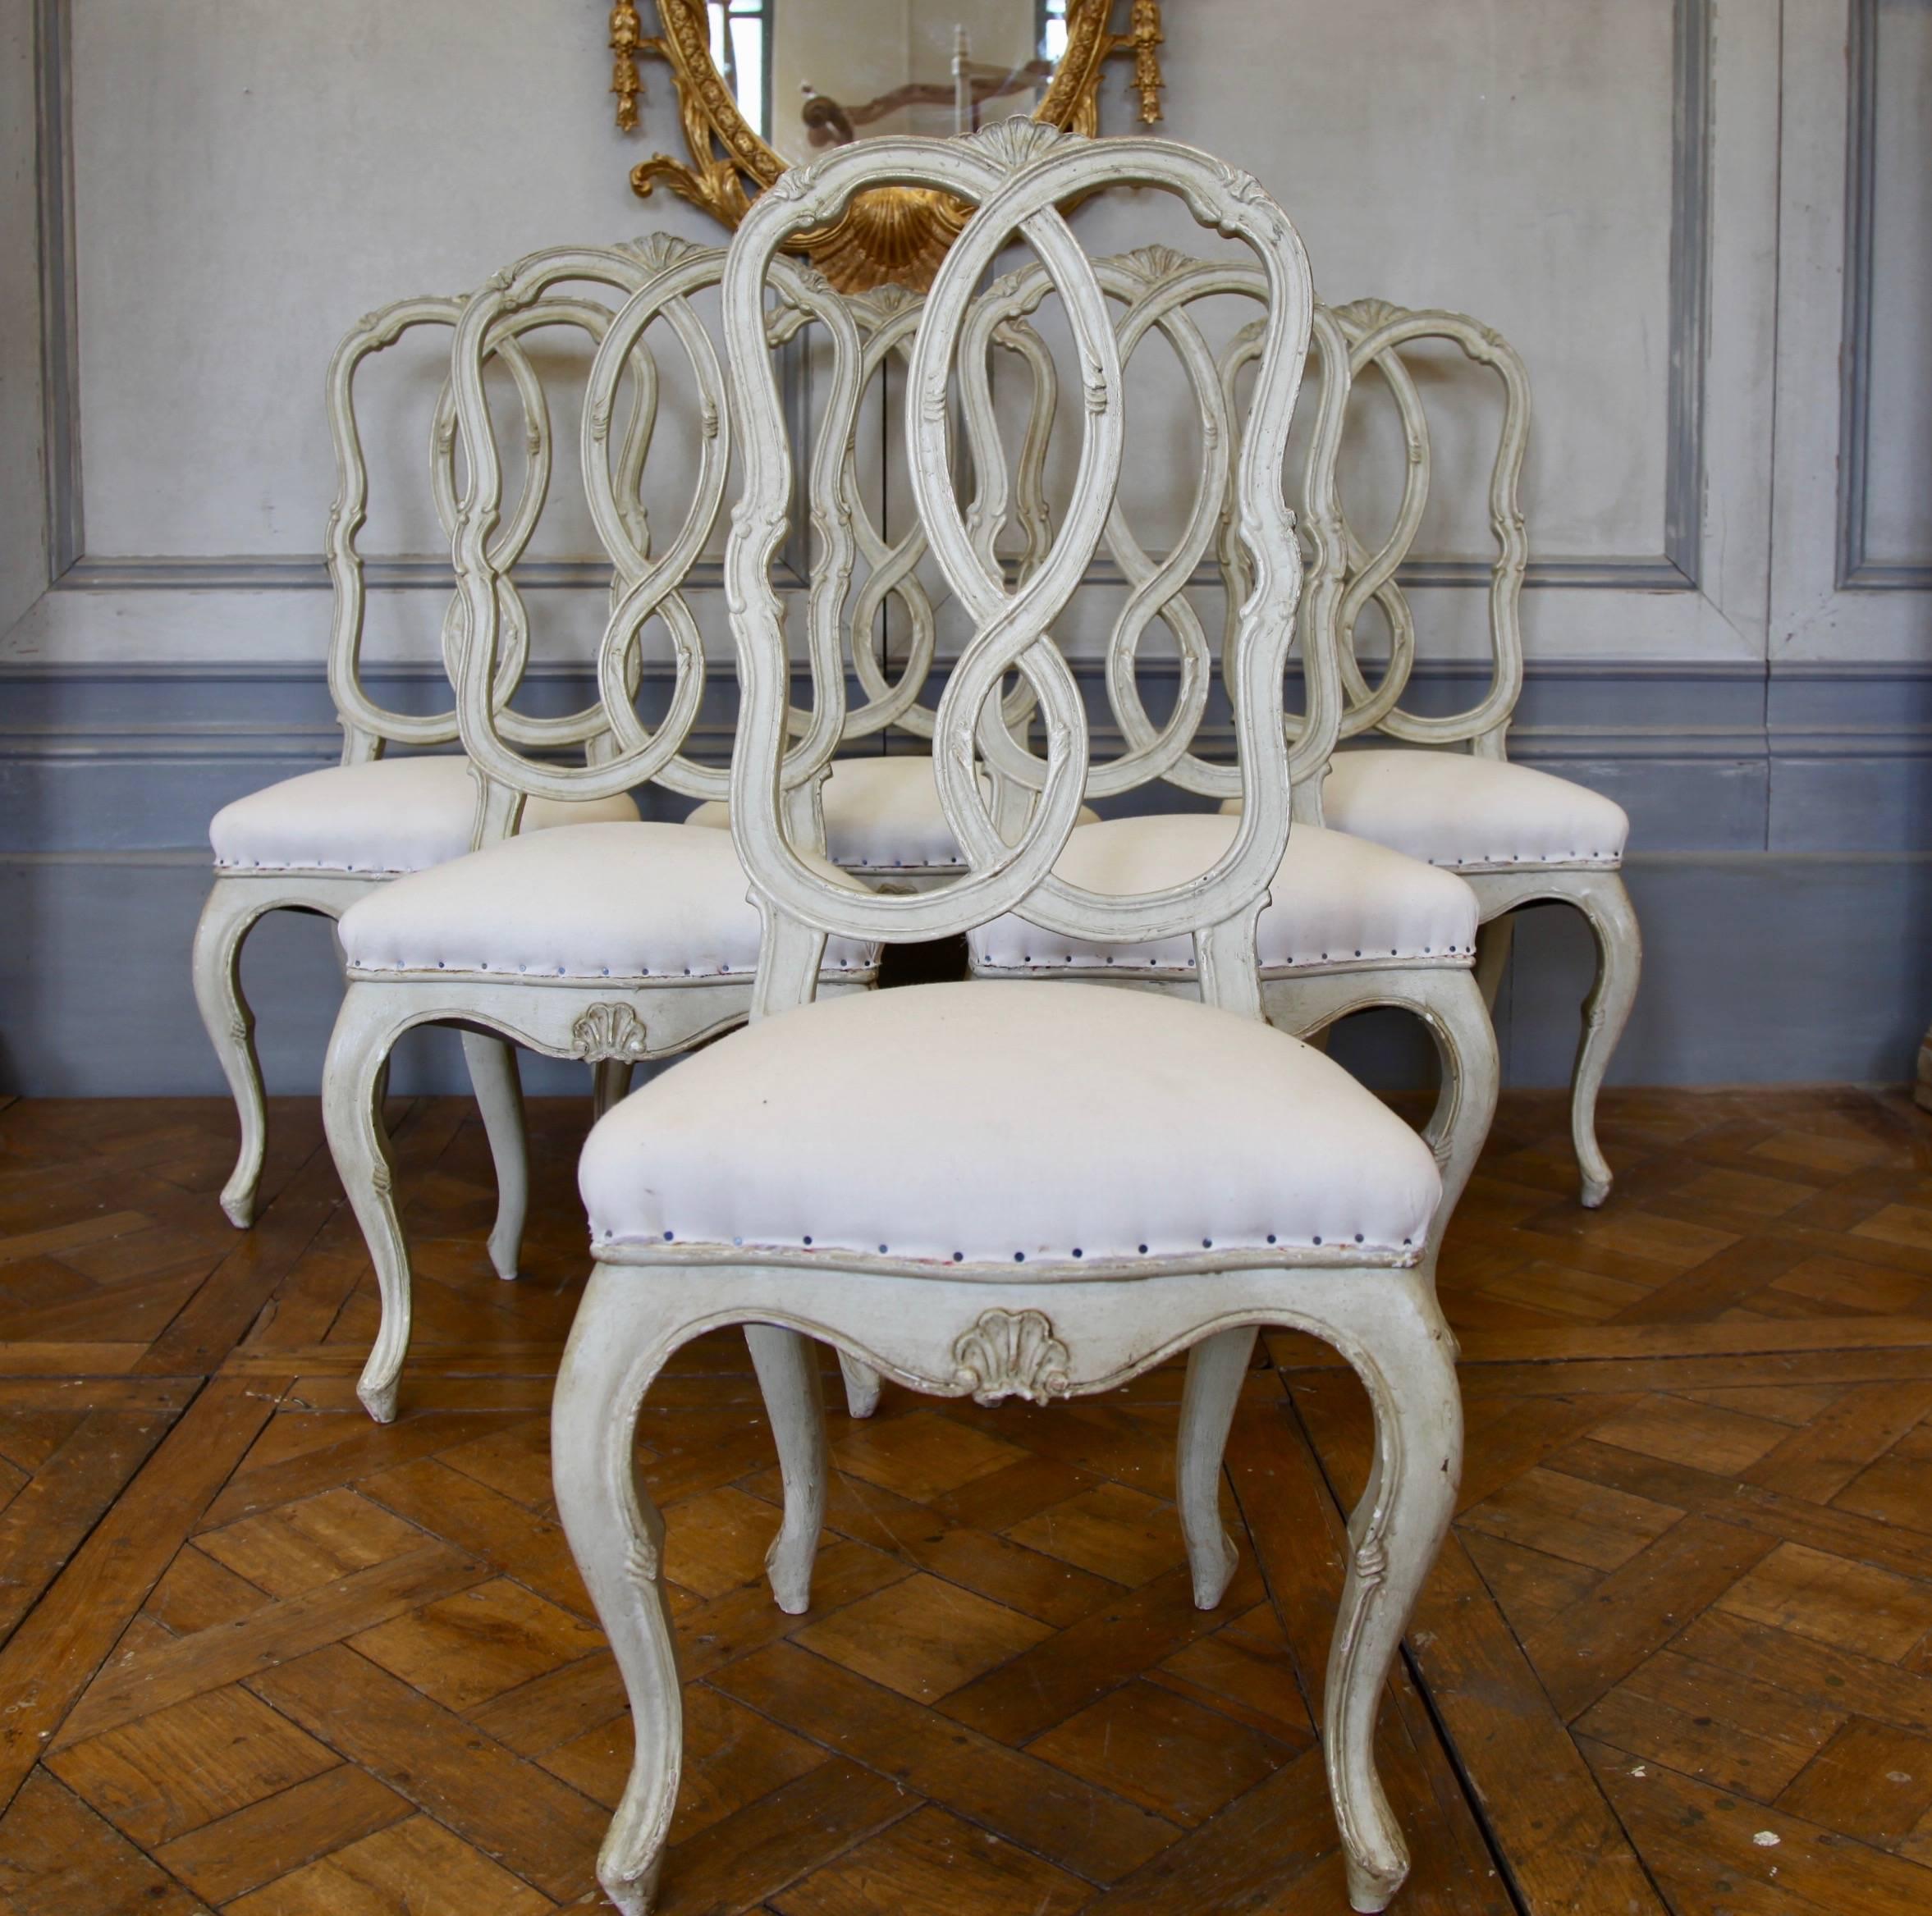 19th century set of dining chairs,
with elegant scrolled back , painted in a light warm grey.
Covered in Calico, ready to be covered.
 